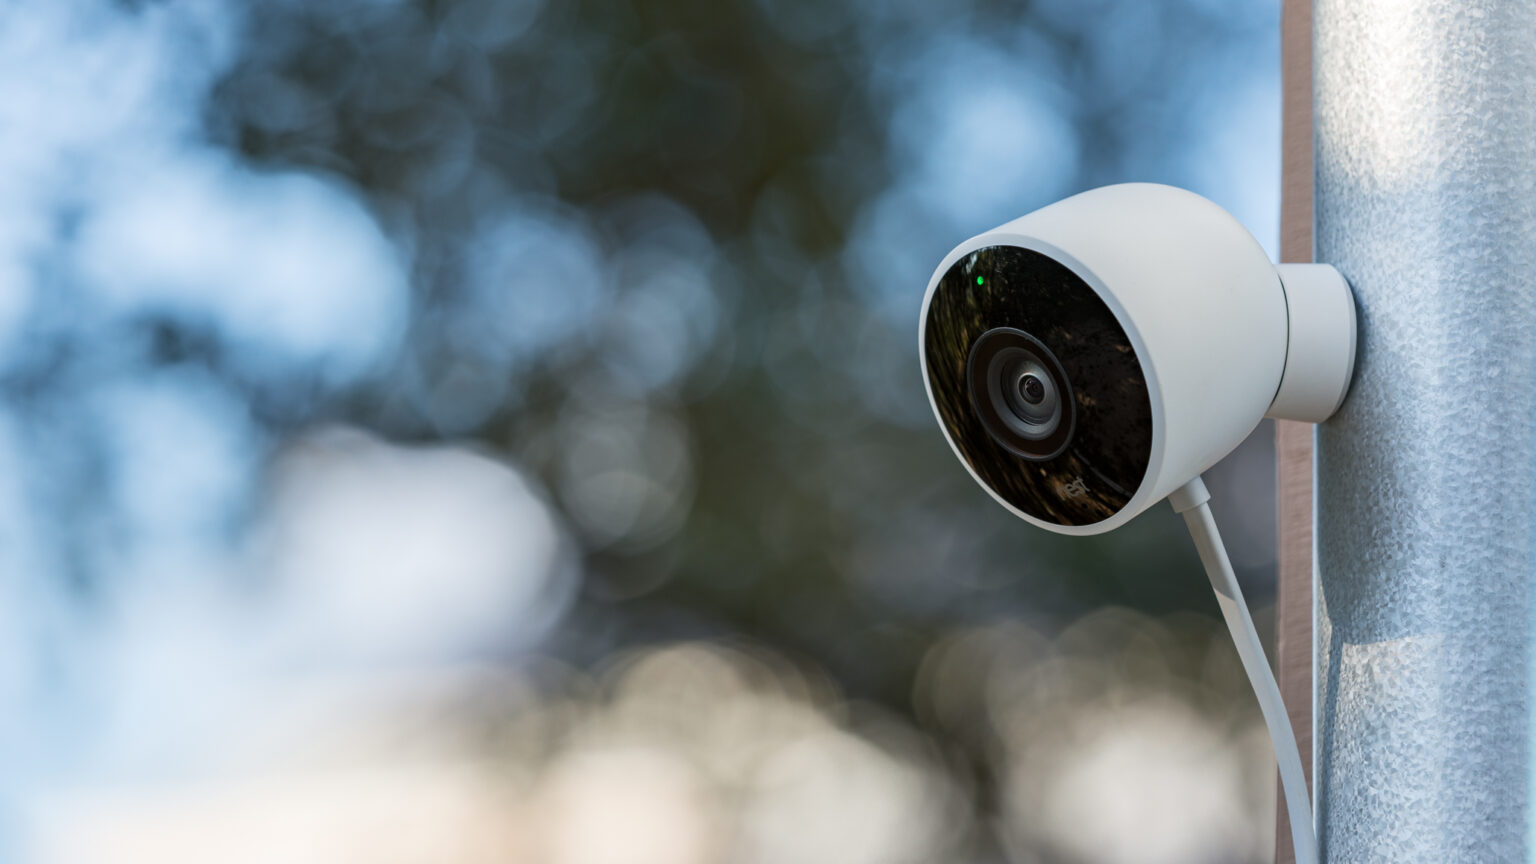 Security cameras have gotten much smarter, but where you place them can increase their effectiveness. Image: Digitized House Media.